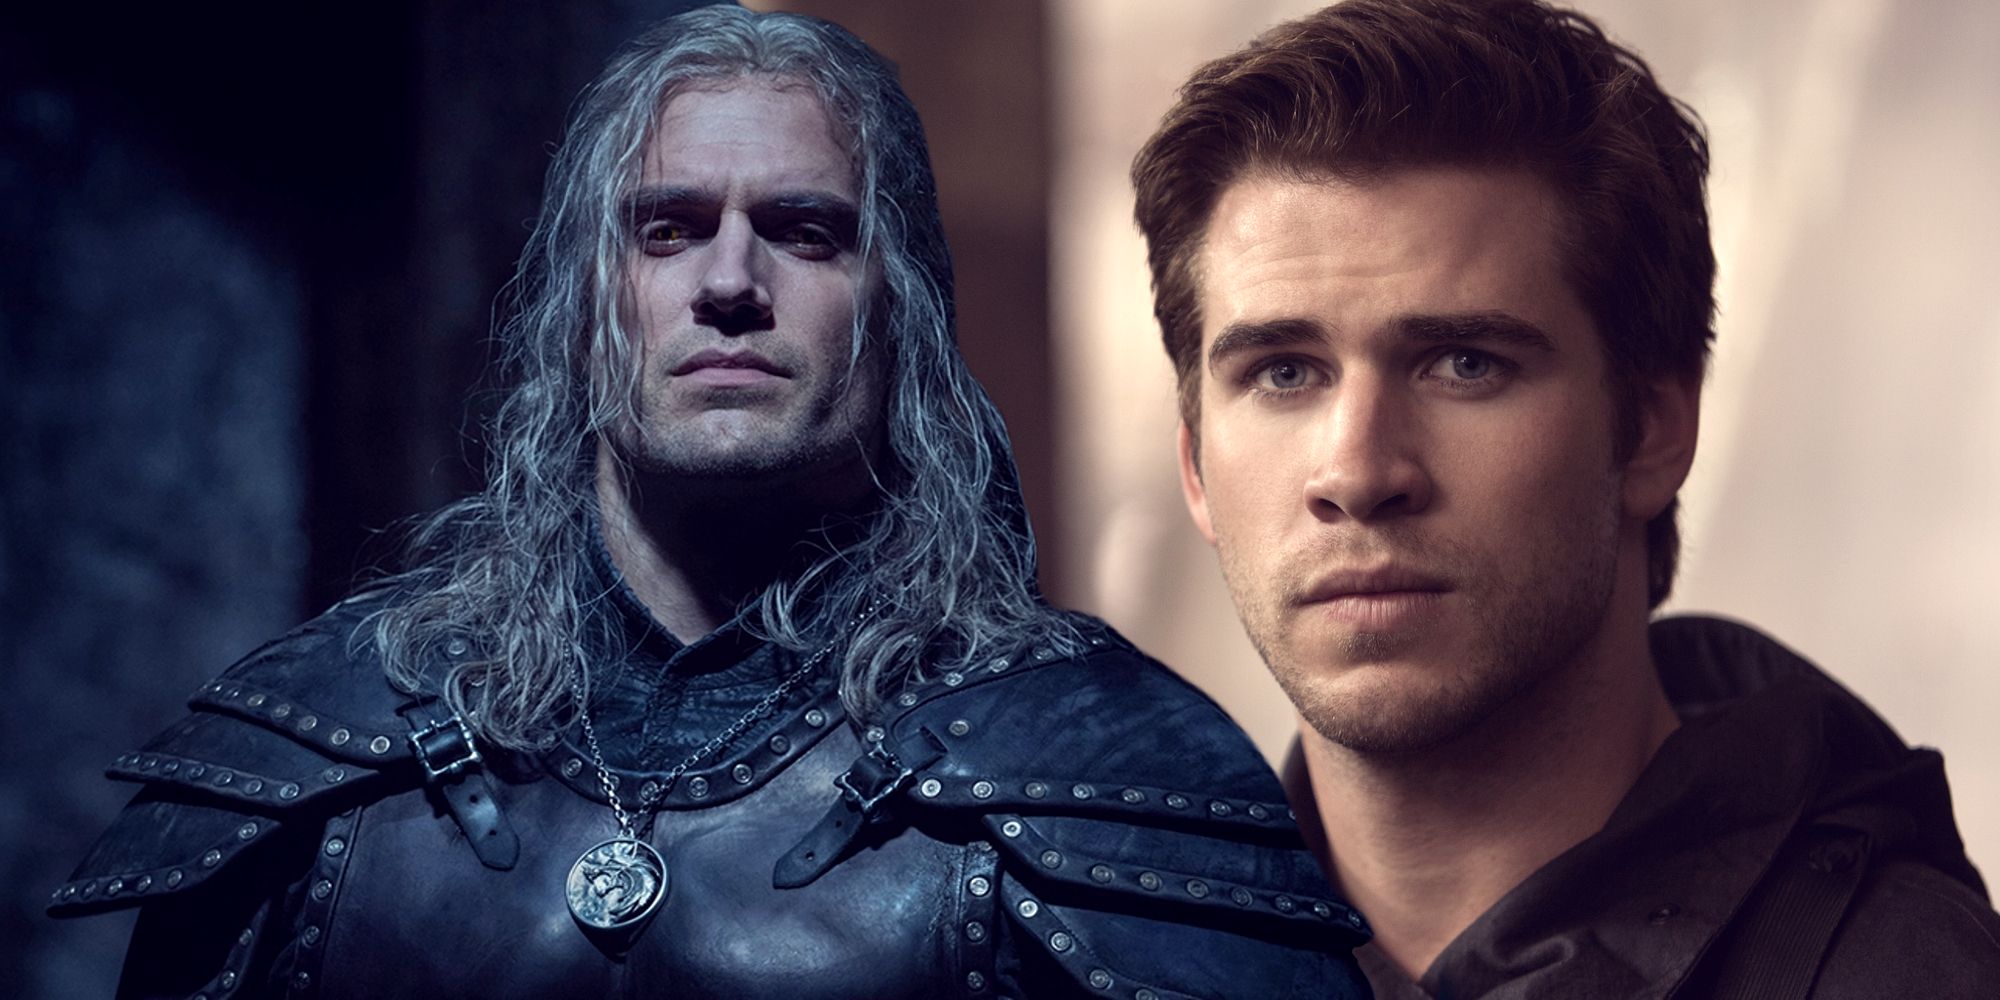 Blended image of Henry Cavill as Geralt of Rivia and Liam Hemsworth.